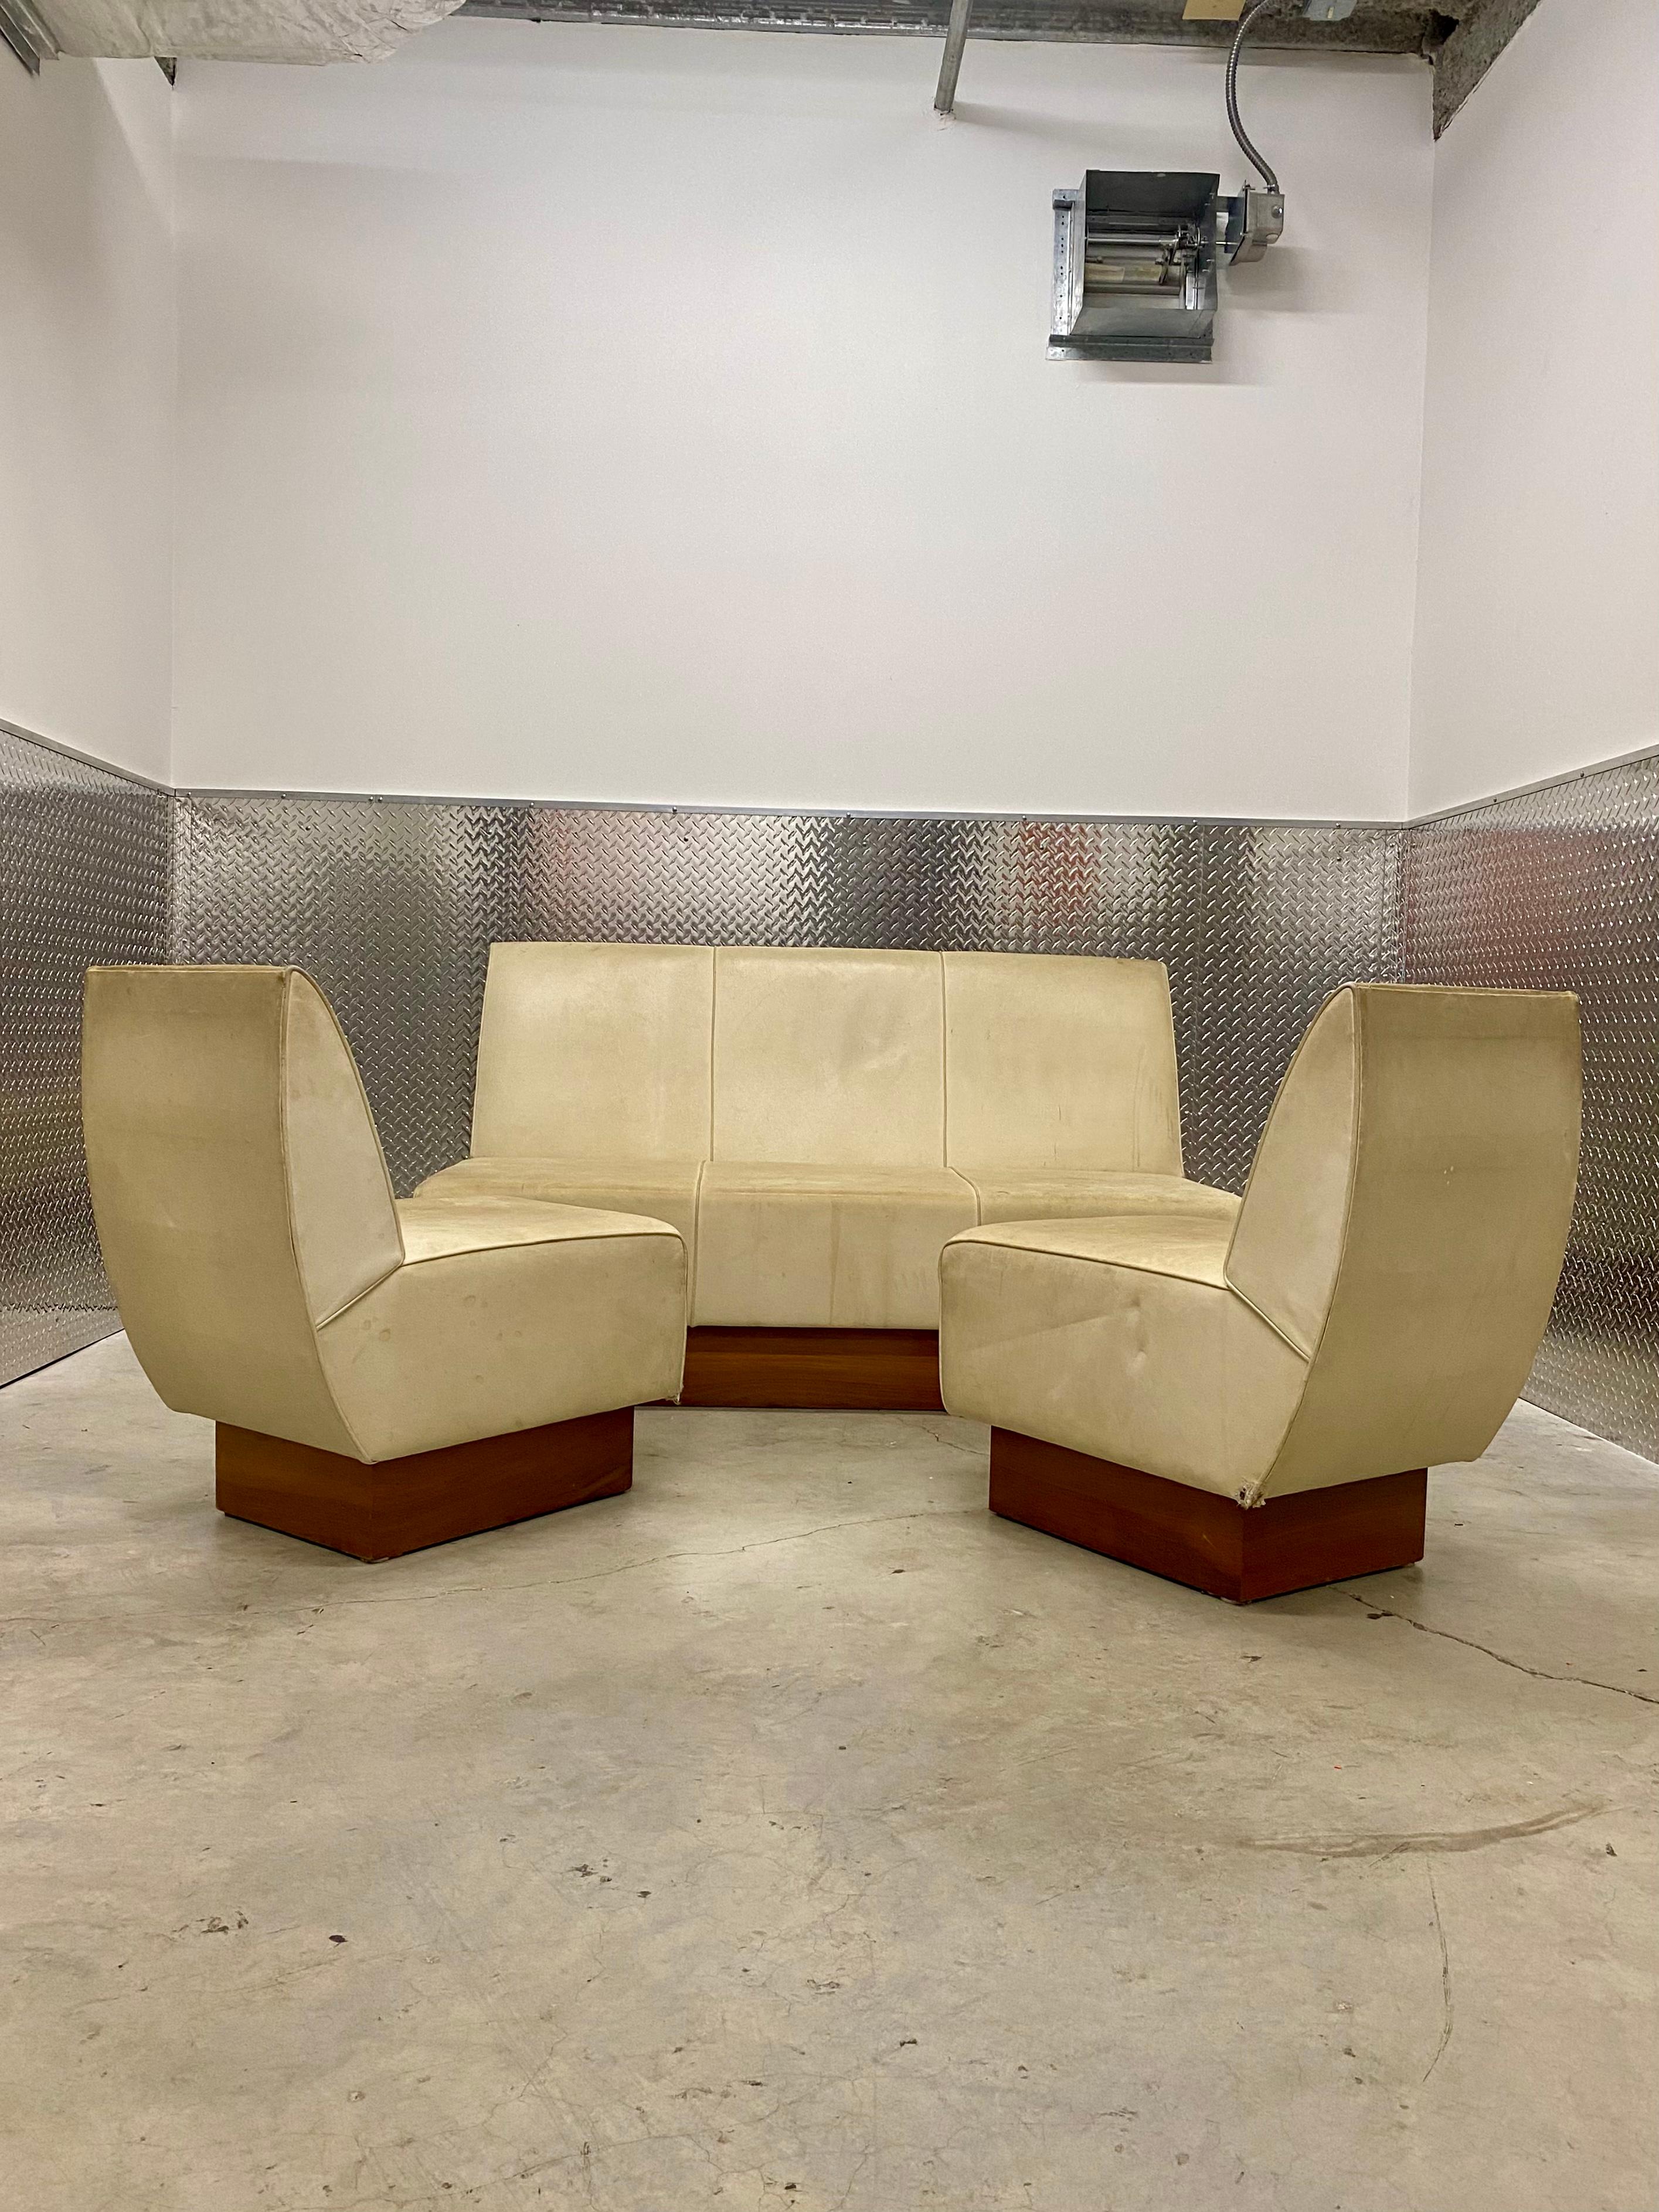 1960s Milo Baughman Leather Plinth Floating Sofa and Chairs, Set of 3 In Good Condition For Sale In Fort Lauderdale, FL